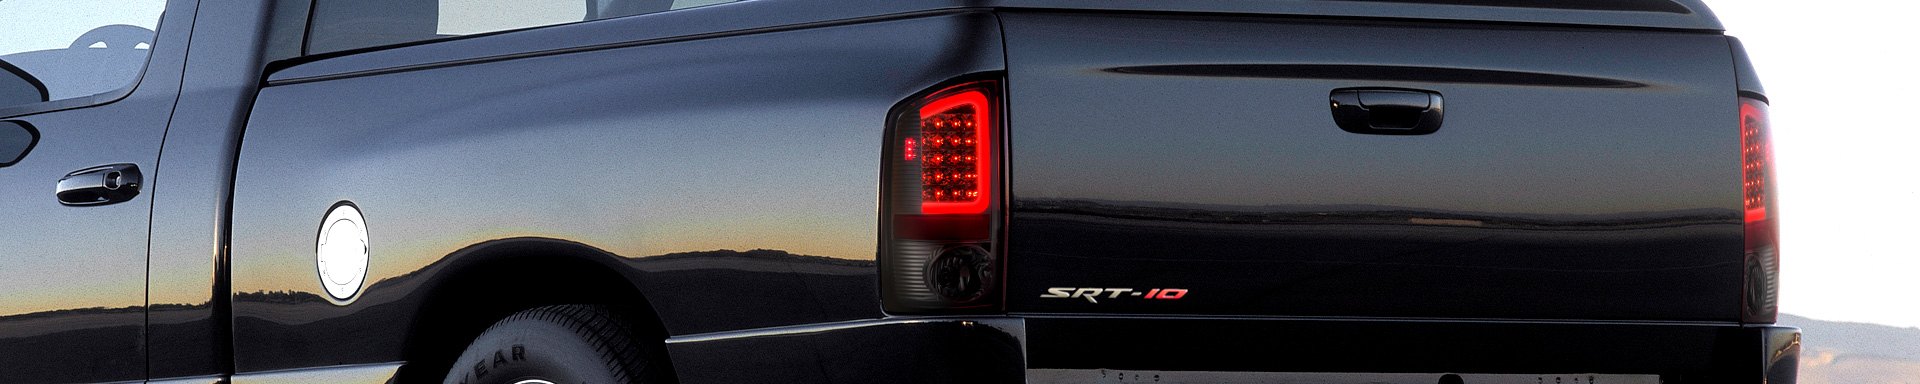 Introducing New Modern LED Tail Lights for RAM Trucks by Lumen